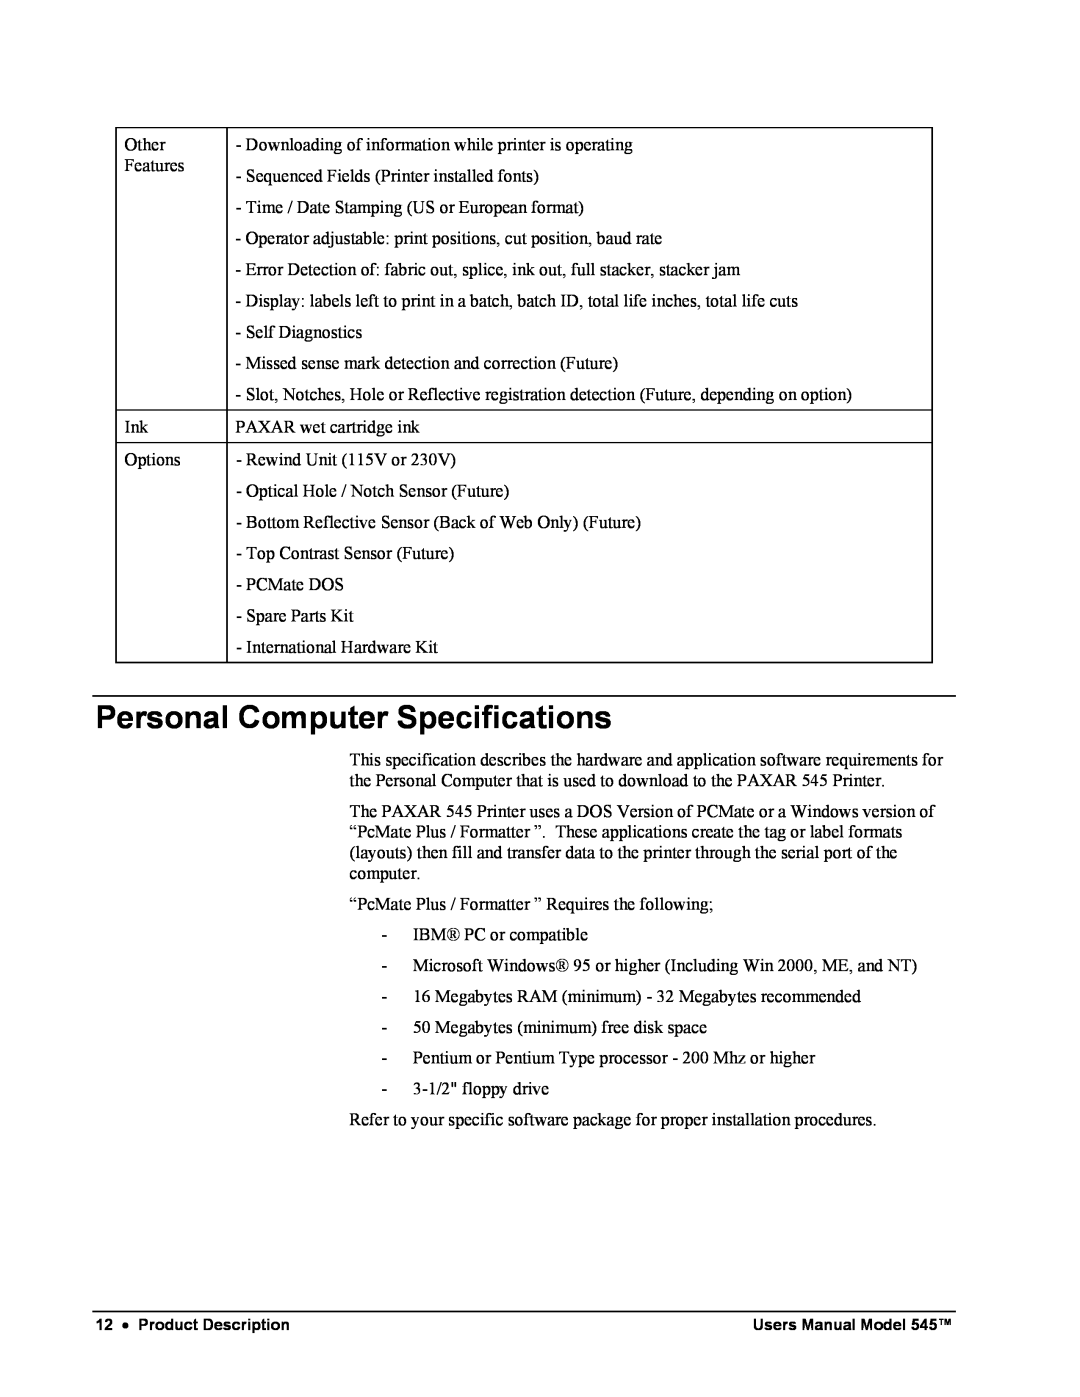 Paxar 545 user manual Personal Computer Specifications 